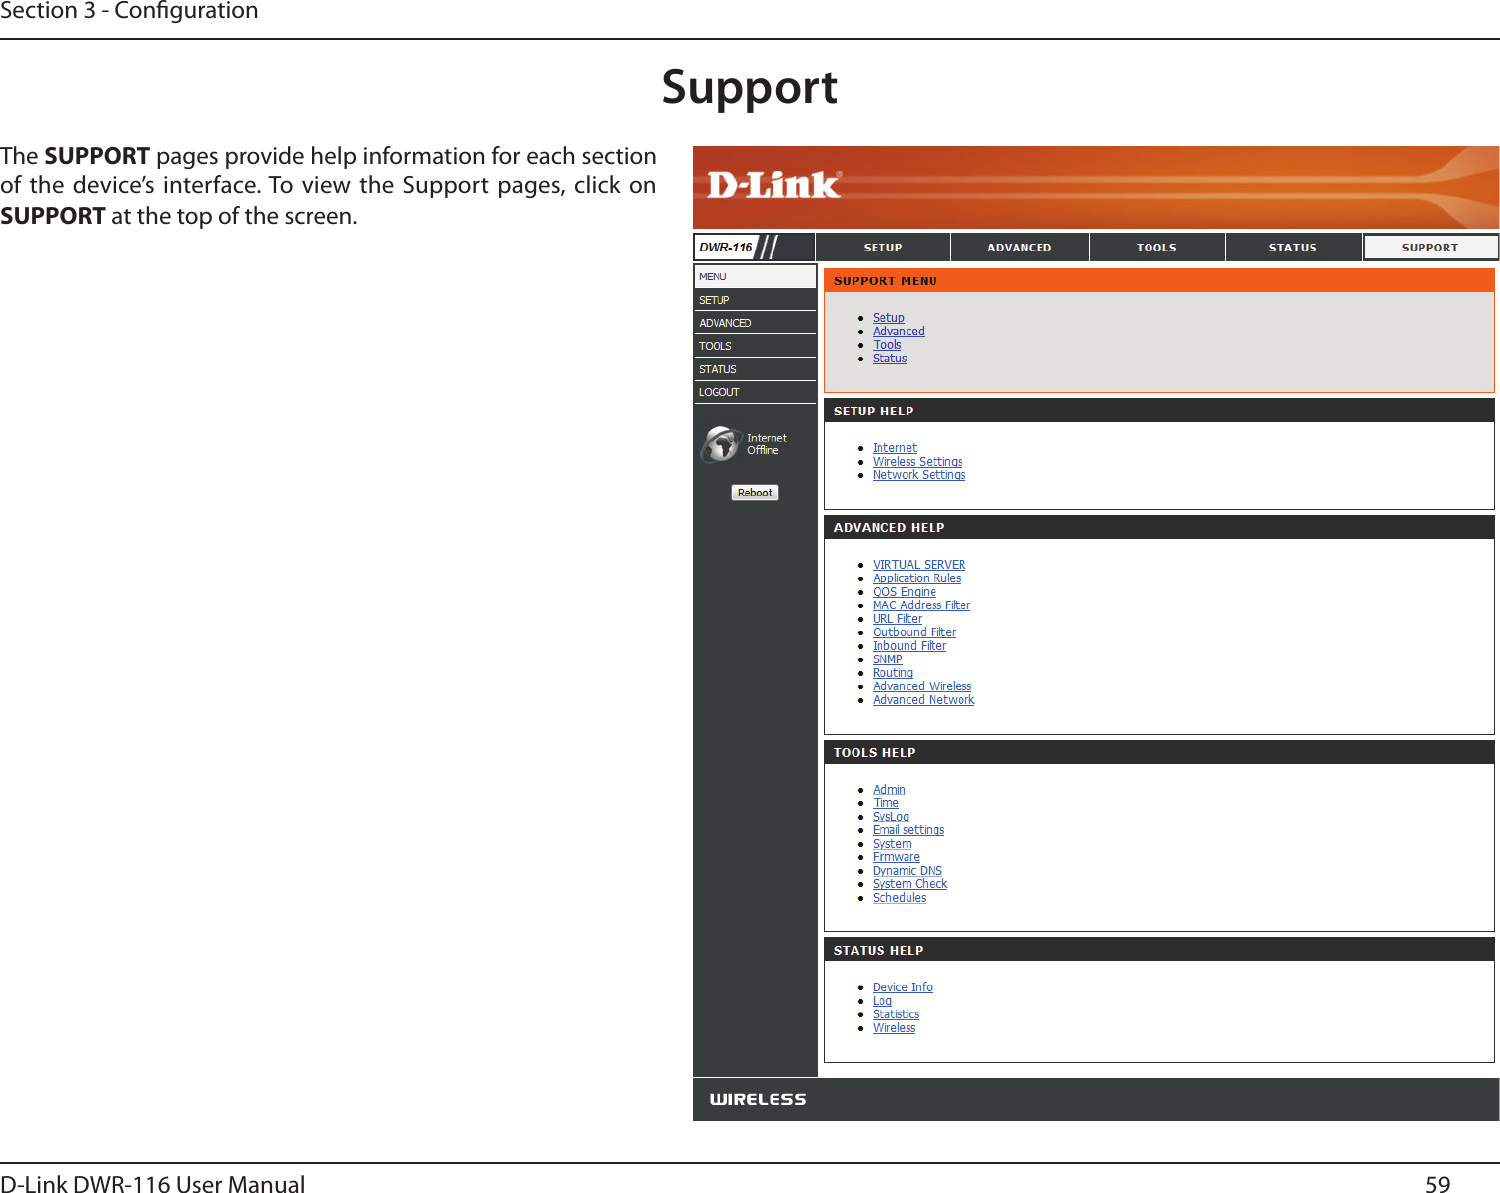 59D-Link DWR-116 User ManualSection 3 - CongurationSupportThe SUPPORT pages provide help information for each section of the  device’s interface. To view the Support  pages, click on SUPPORT at the top of the screen.